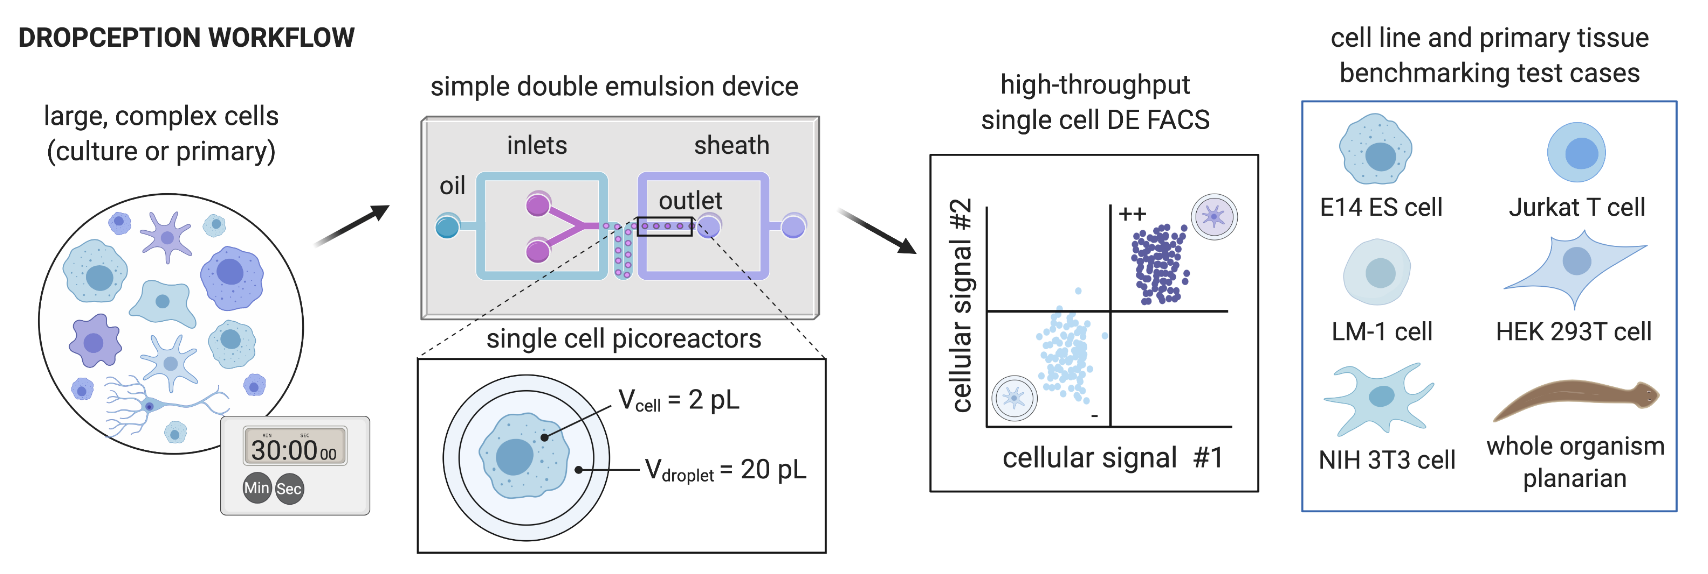 Single cell. High-throughput Phenotyping. Single Cell lifeformsabnautica. Cell Print. Emulsion pptx.